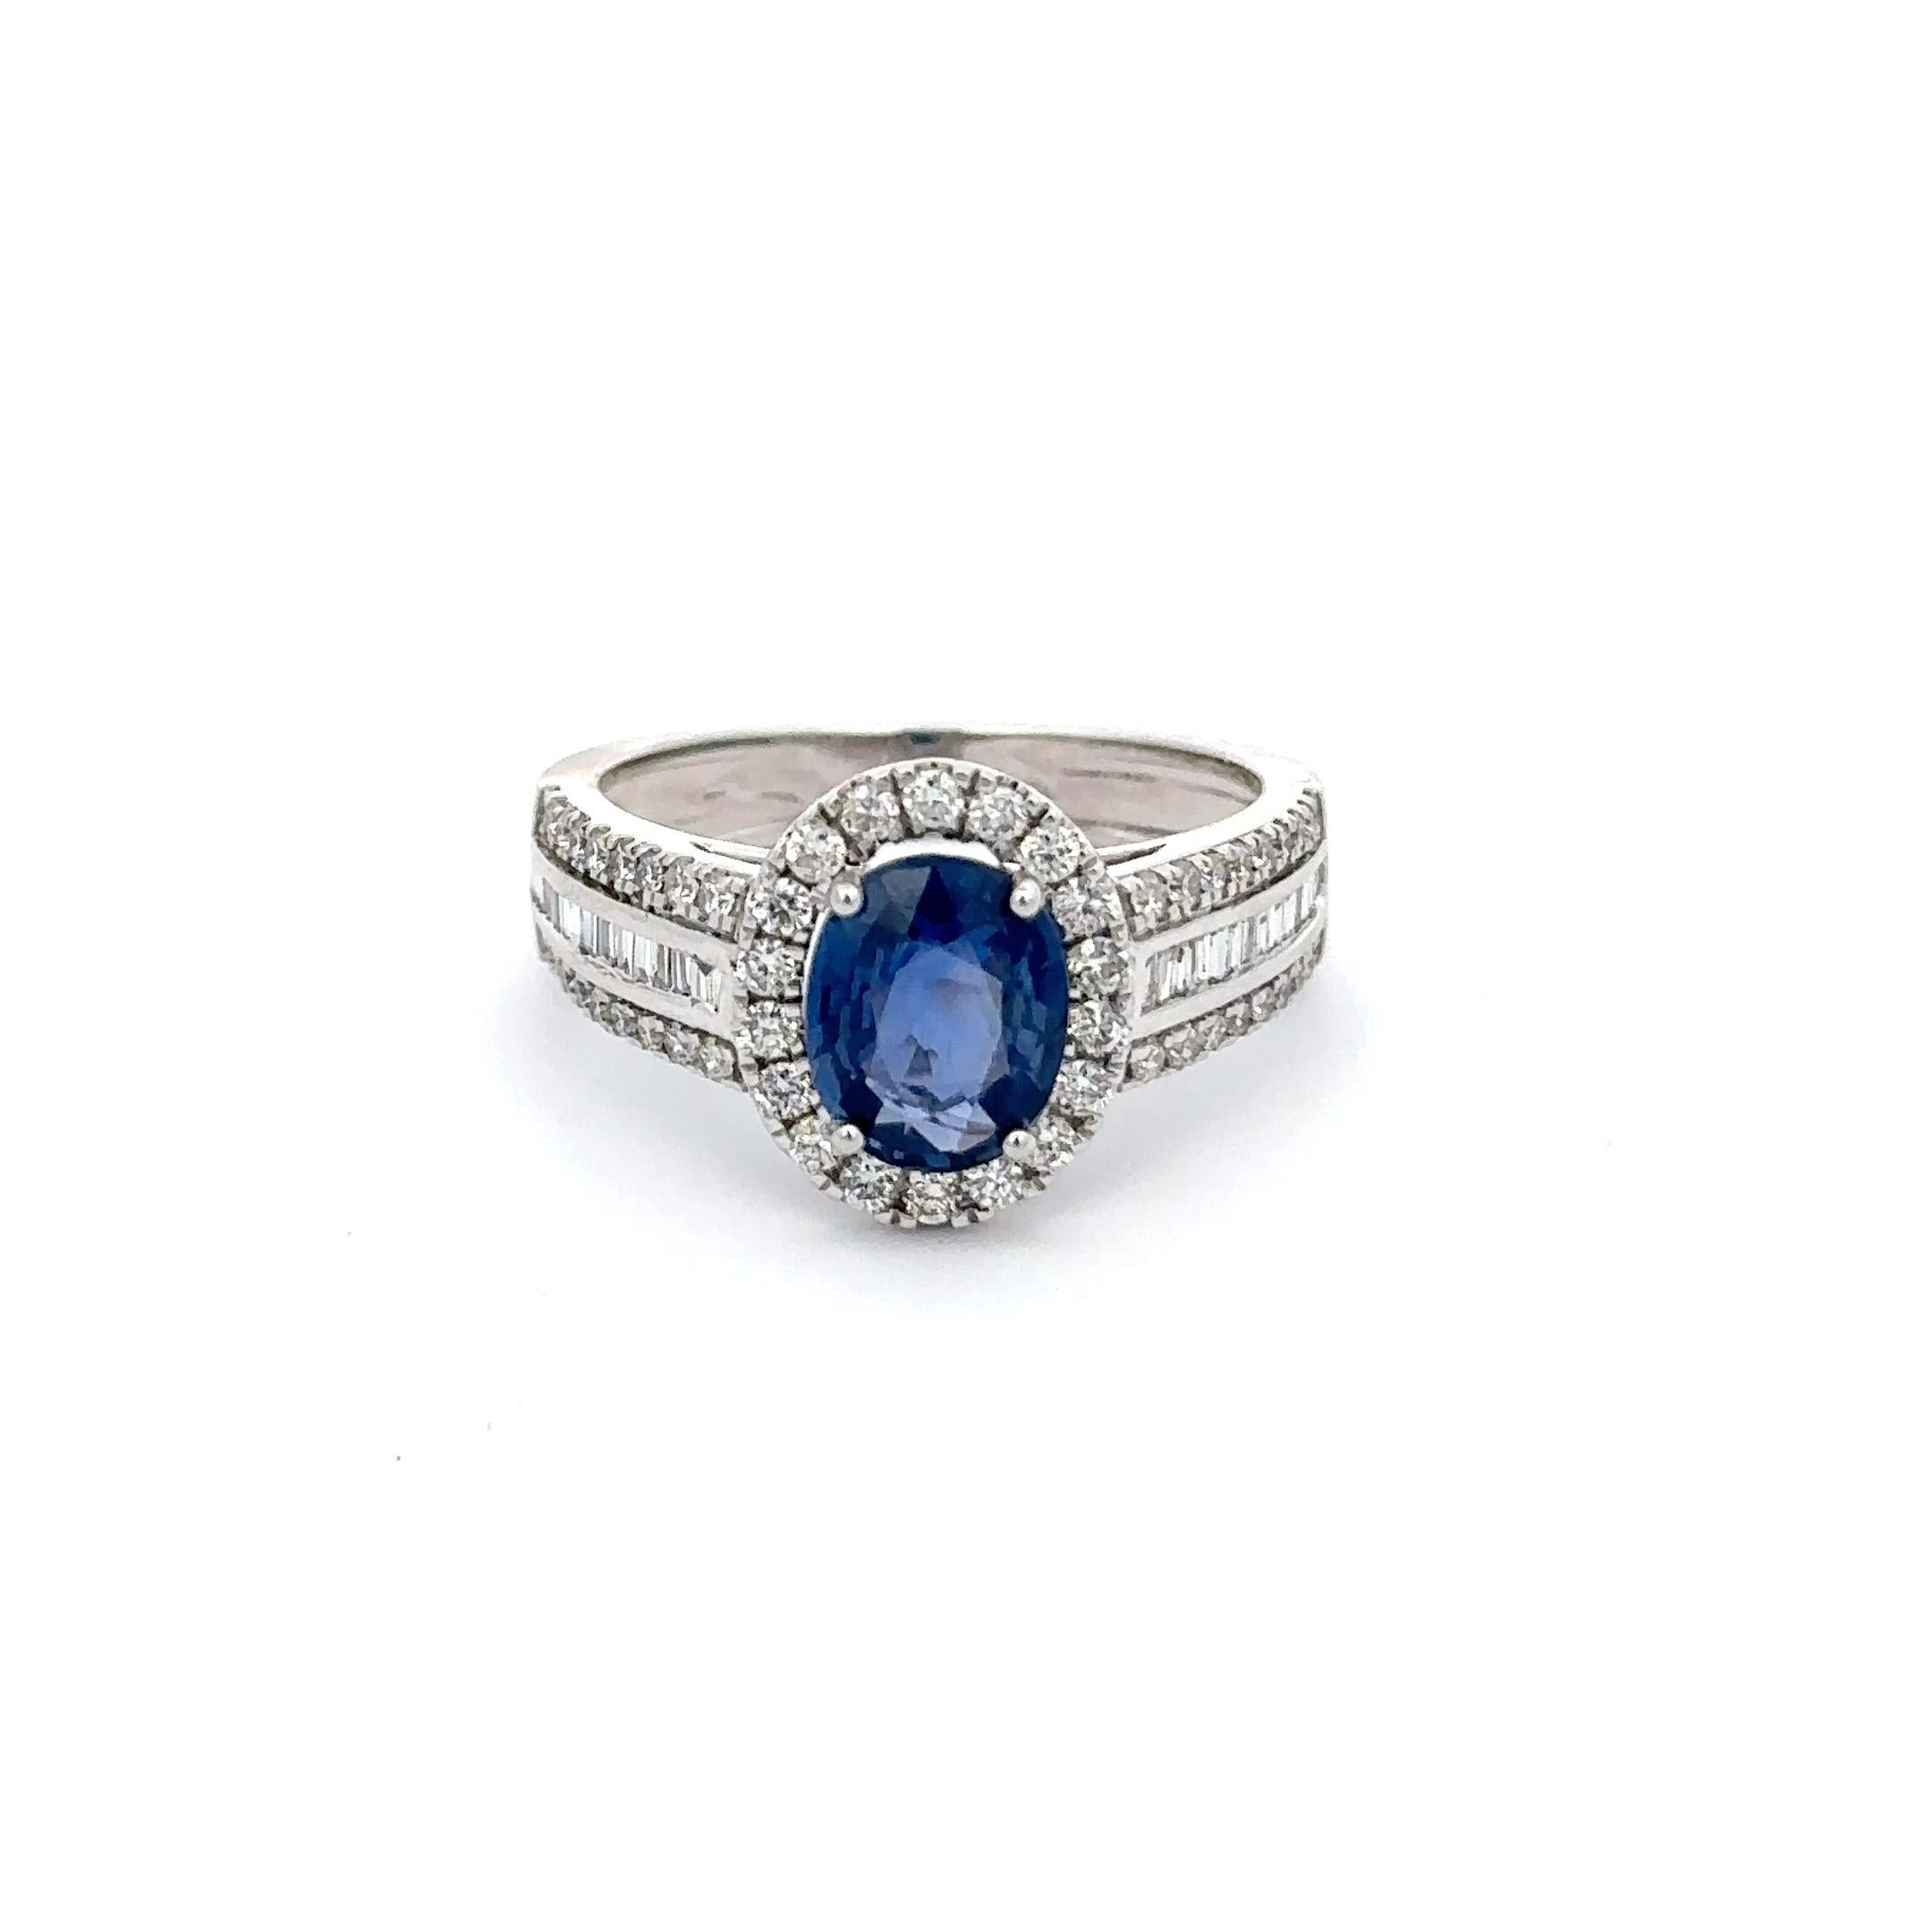 For Sale:  18k Solid White Gold Genuine Oval Blue Sapphire and Diamond Engagement Ring 3